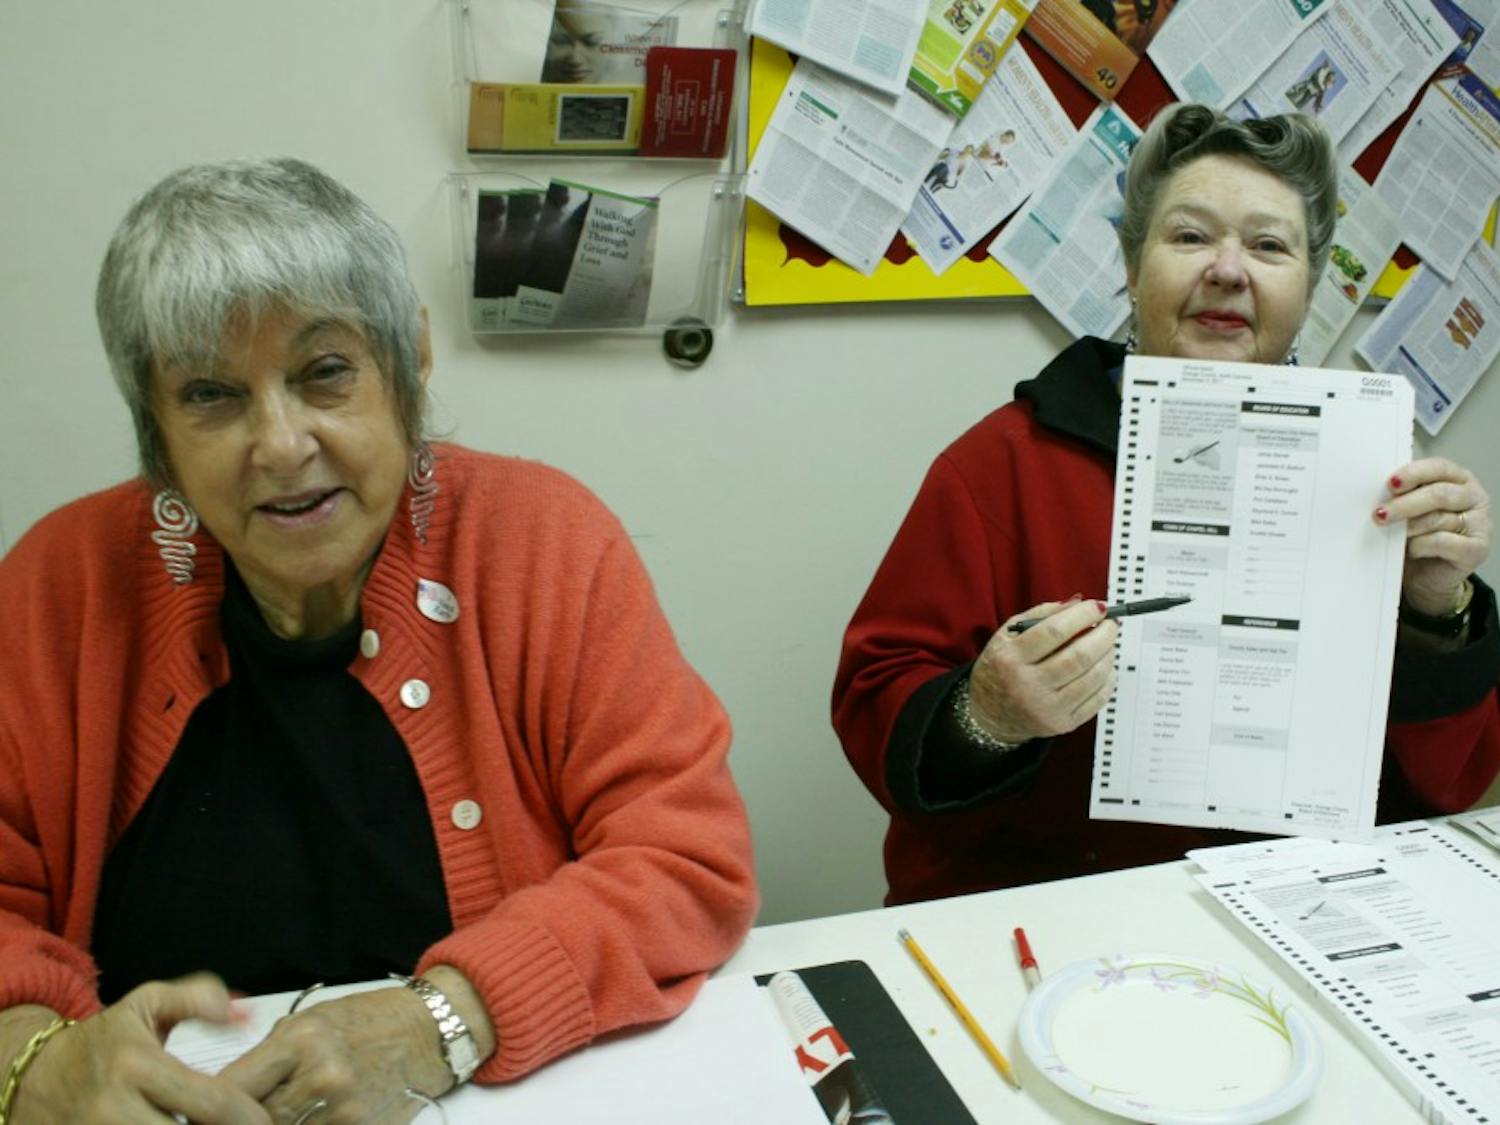 left to right: Iris Schwintzer, Shirley Ray, Ernie Quade. Judges for the E Franklin Street Precinct assist morning voters. Deborah Finn, of 214 Hillsborough St., votes with her husband and dog. (purple jacket). At larger elections, Mrs. Finn is also a judge for the E Franklin Street Precinct